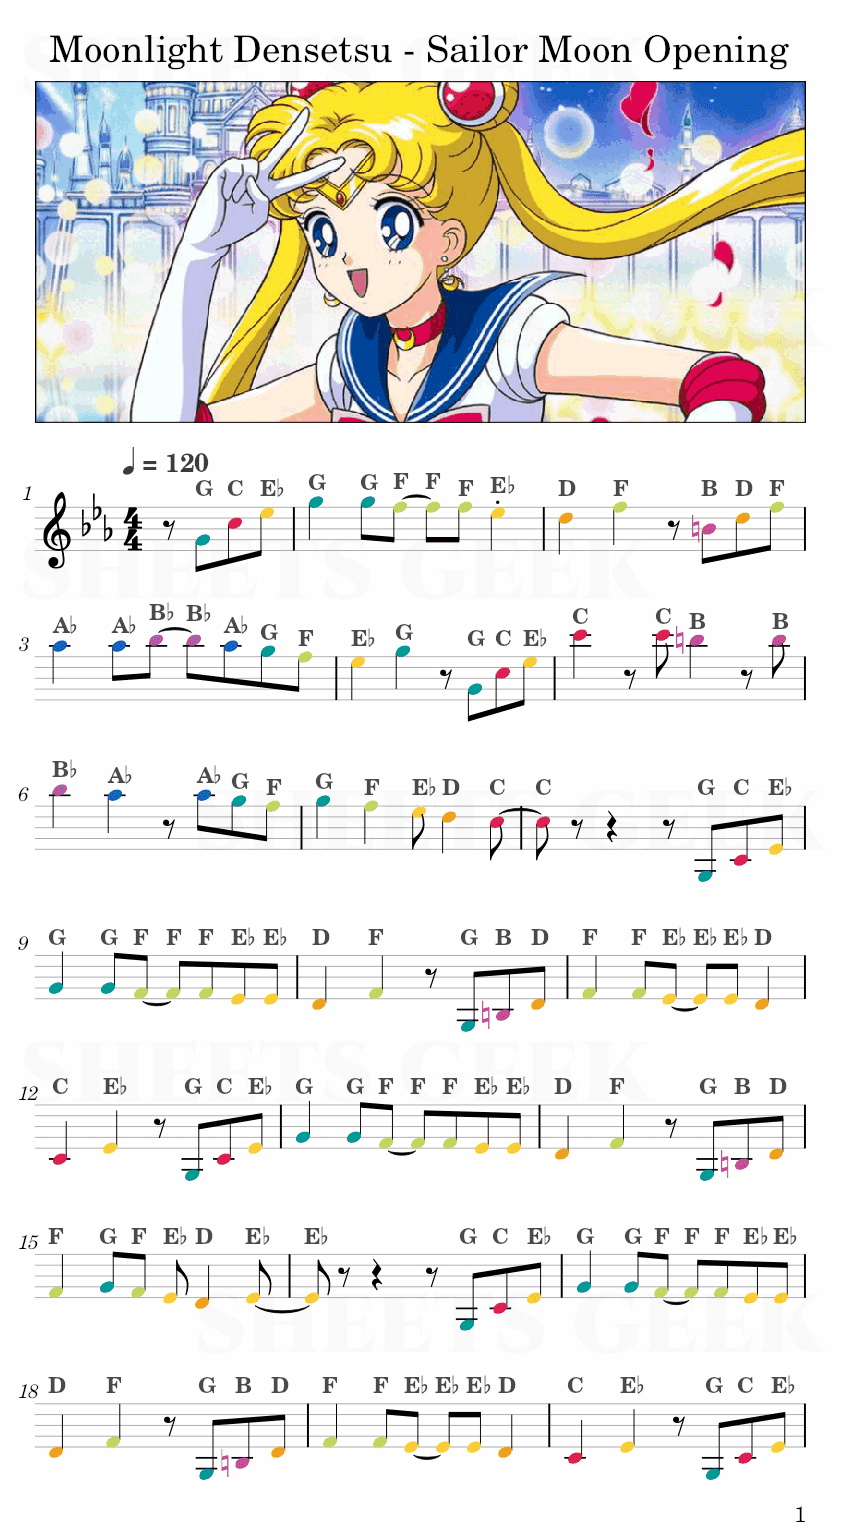 Moonlight Densetsu - Sailor Moon Opening Easy Sheet Music Free for piano, keyboard, flute, violin, sax, cello page 1